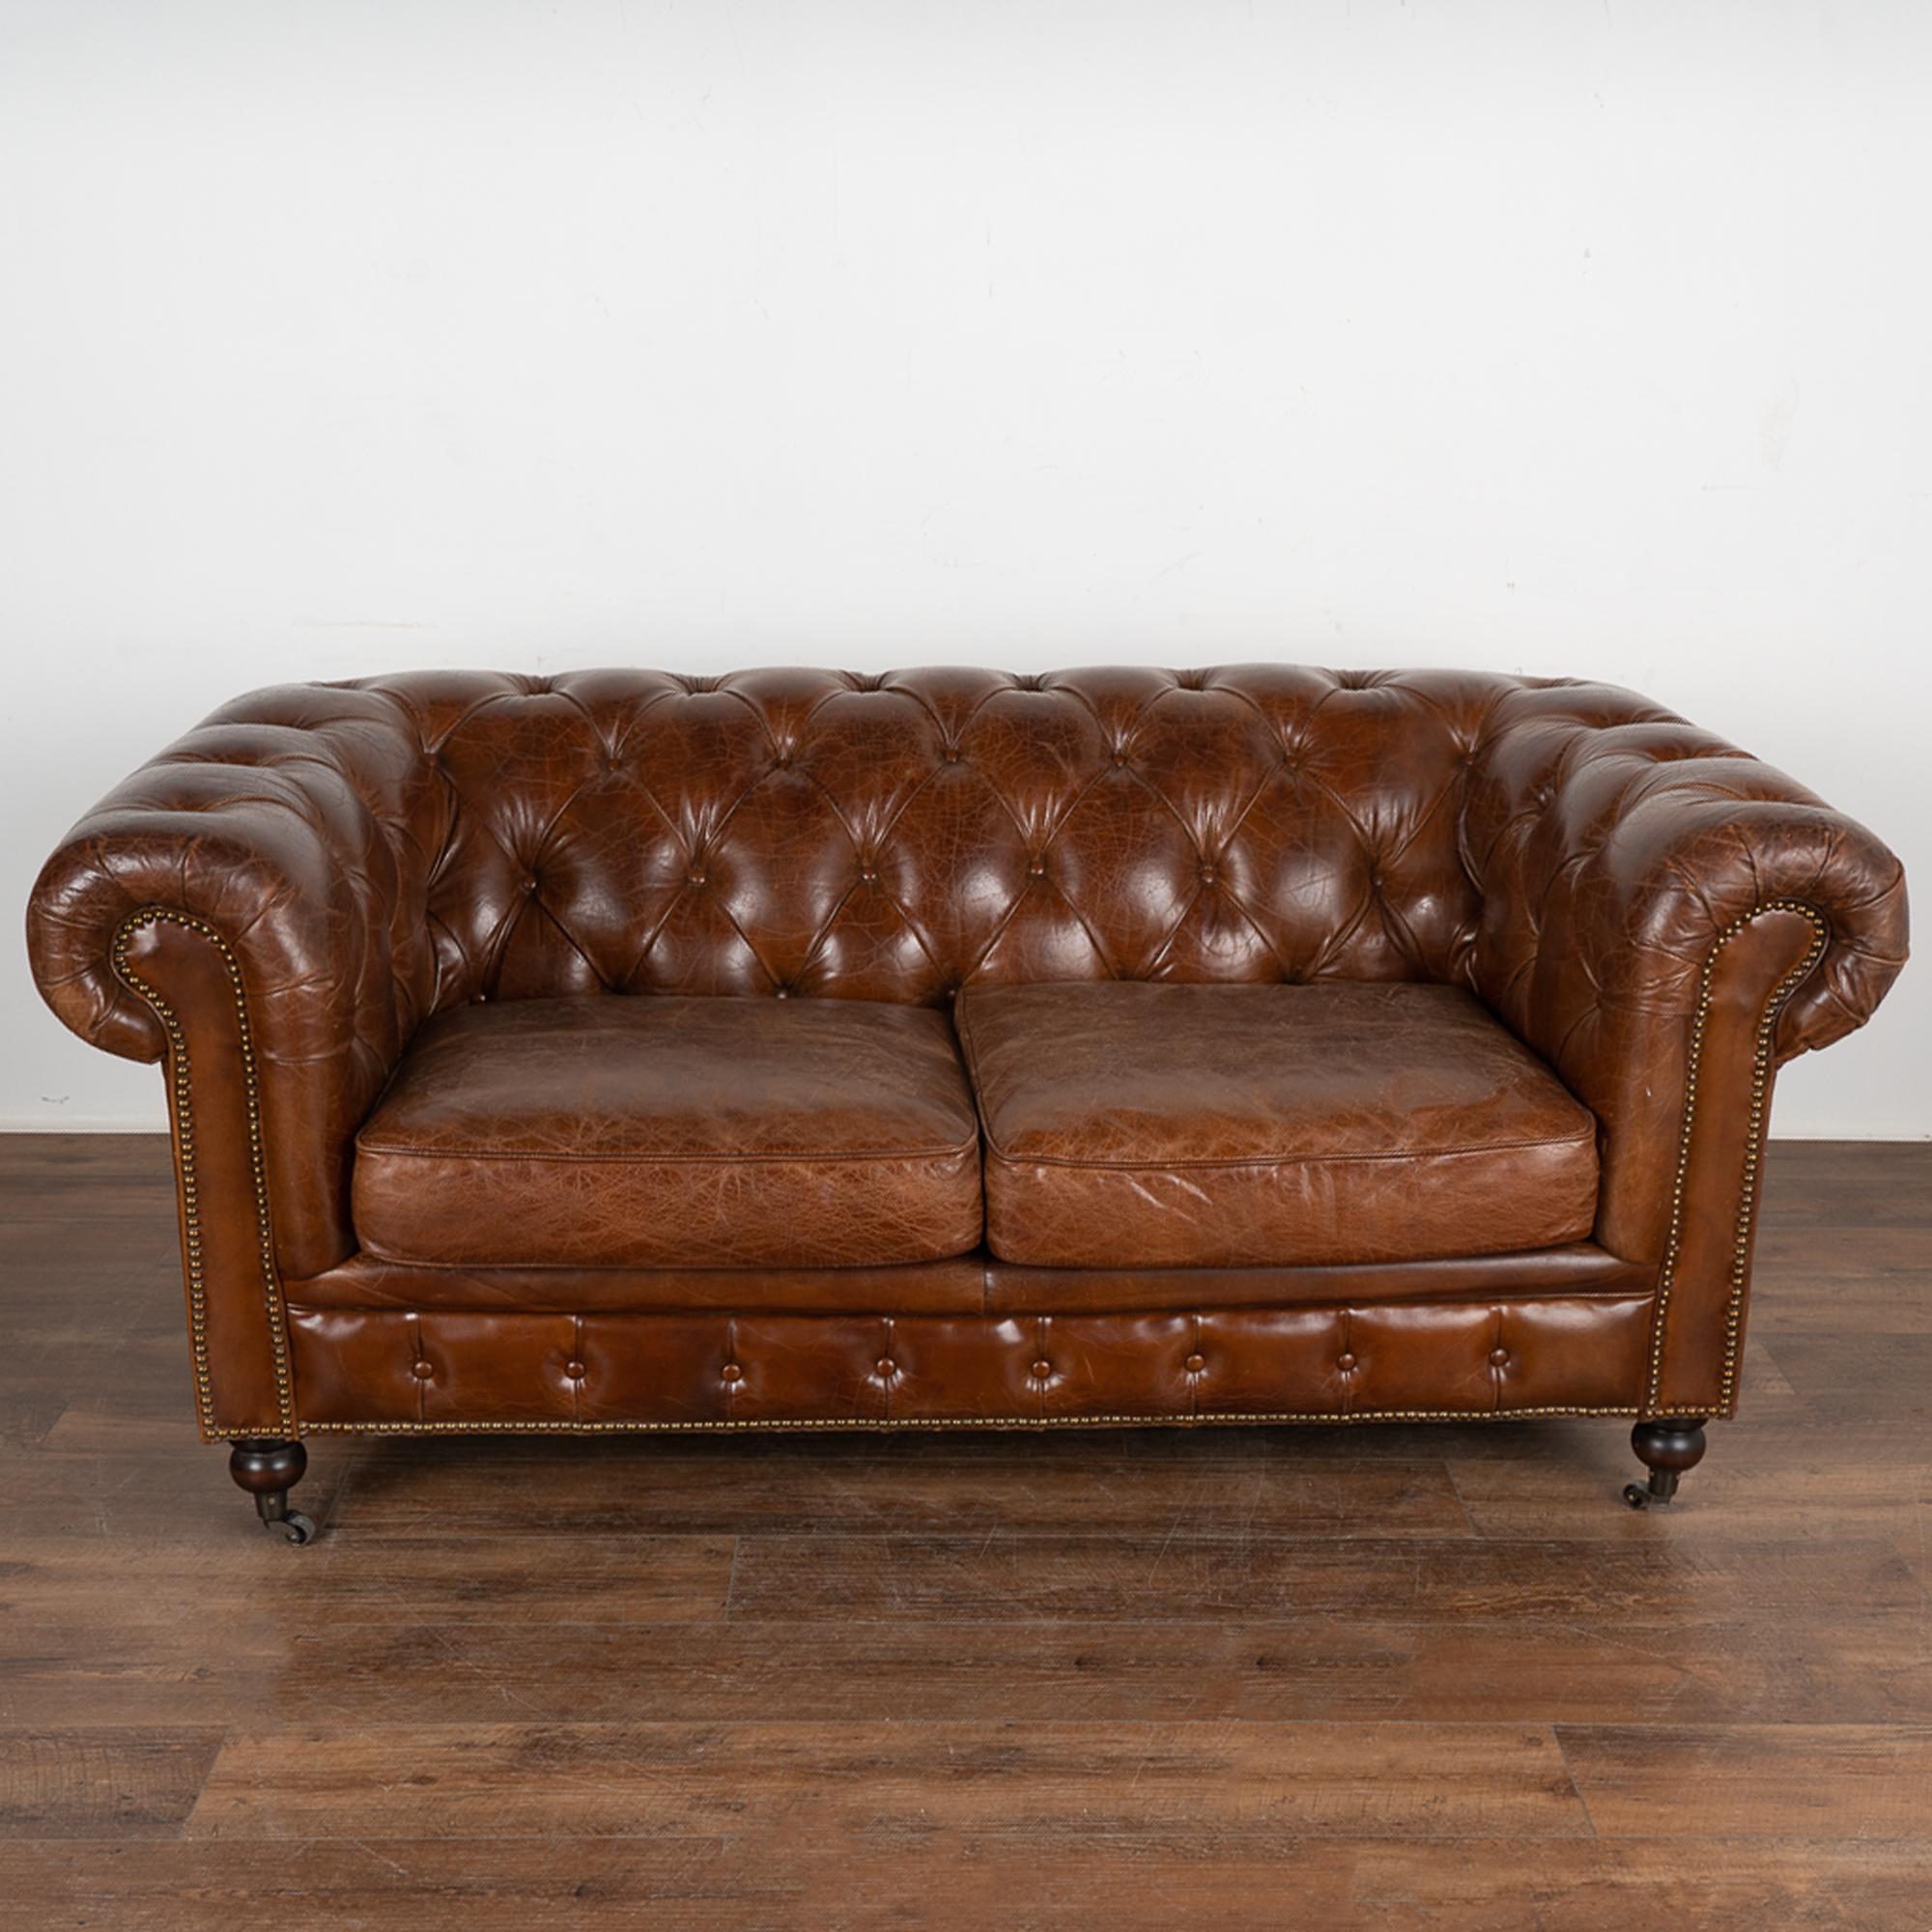 English Vintage Brown Leather Chesterfield Two Seat Sofa Loveseat, England circa 1960-80